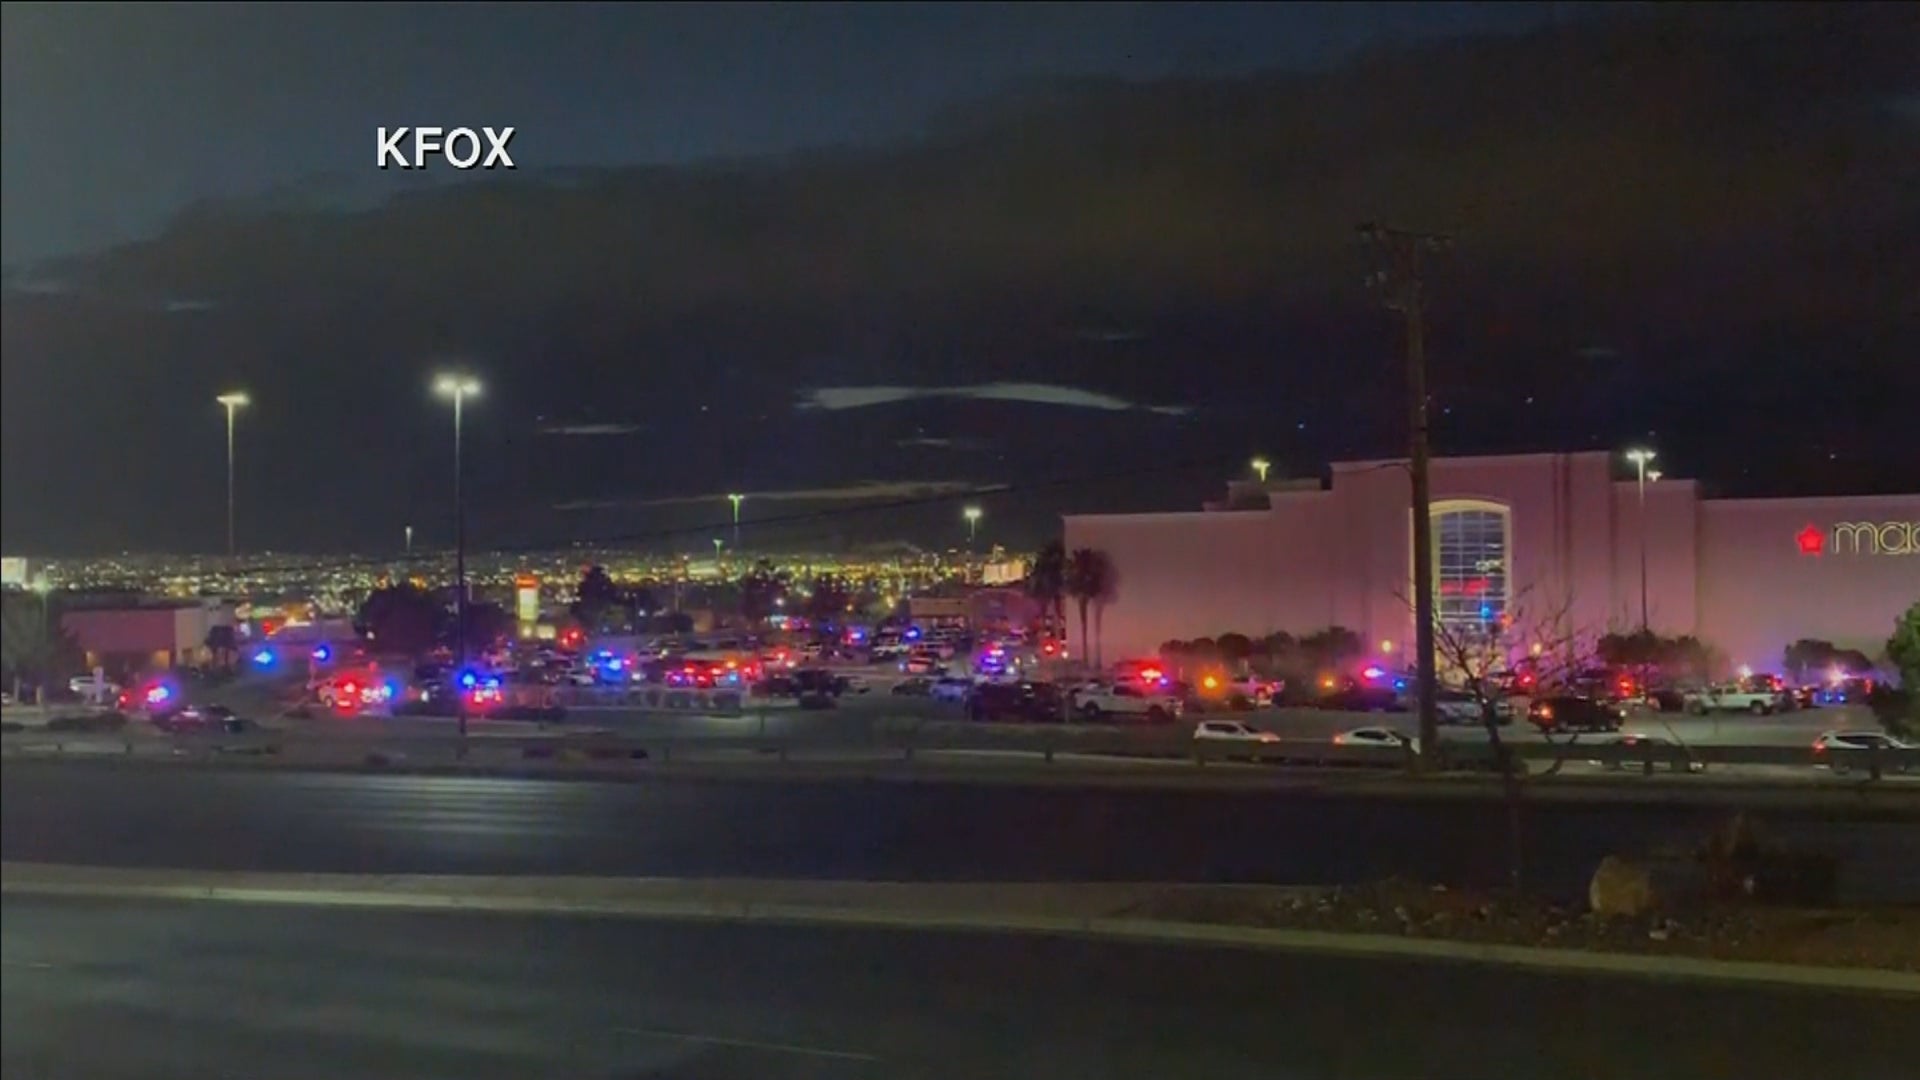  1 dead, 3 injured in shooting at shopping mall in El Paso, Texas 